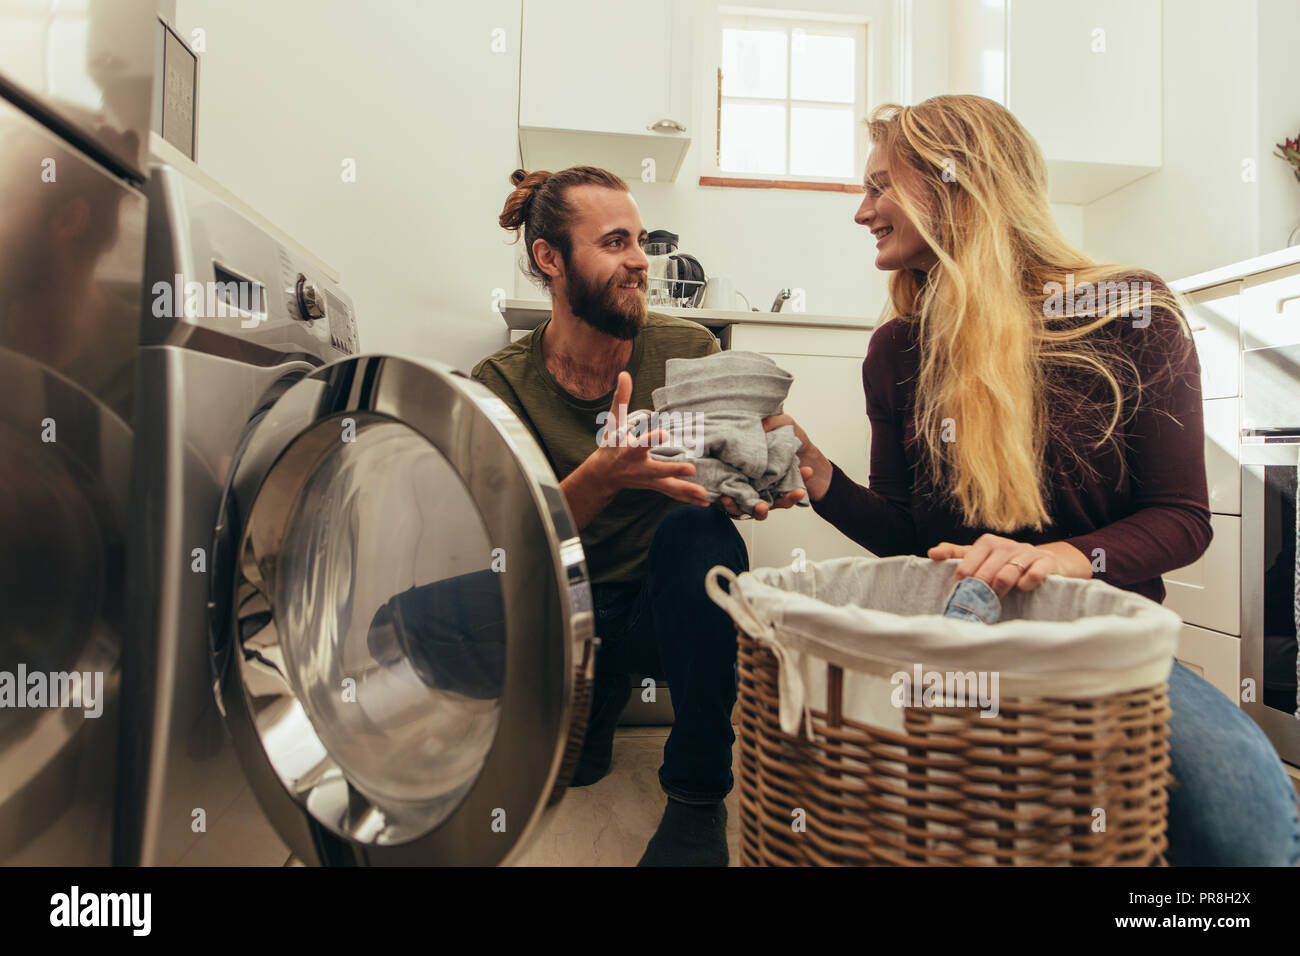 Happy couple putting clothes in washing machine. Couple using a front loading washing machine to wash laundry. Stock Photo